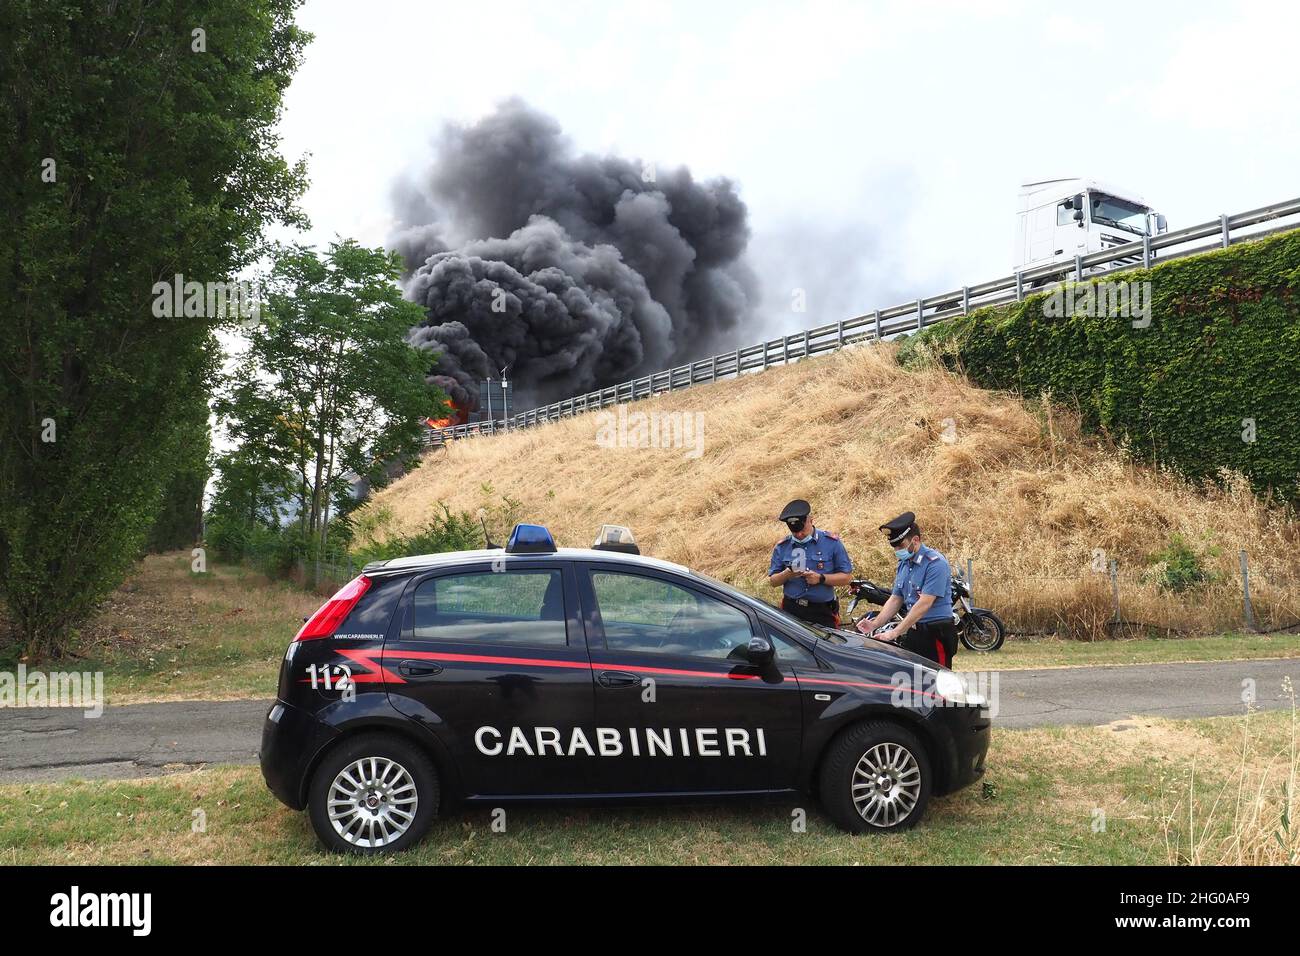 Michele Nucci/LaPresse July 13, 2021 - Bologna, ItalyNewsBologna, a truck fire on the A14 freeway in the pic: Fire truck on the highway Stock Photo